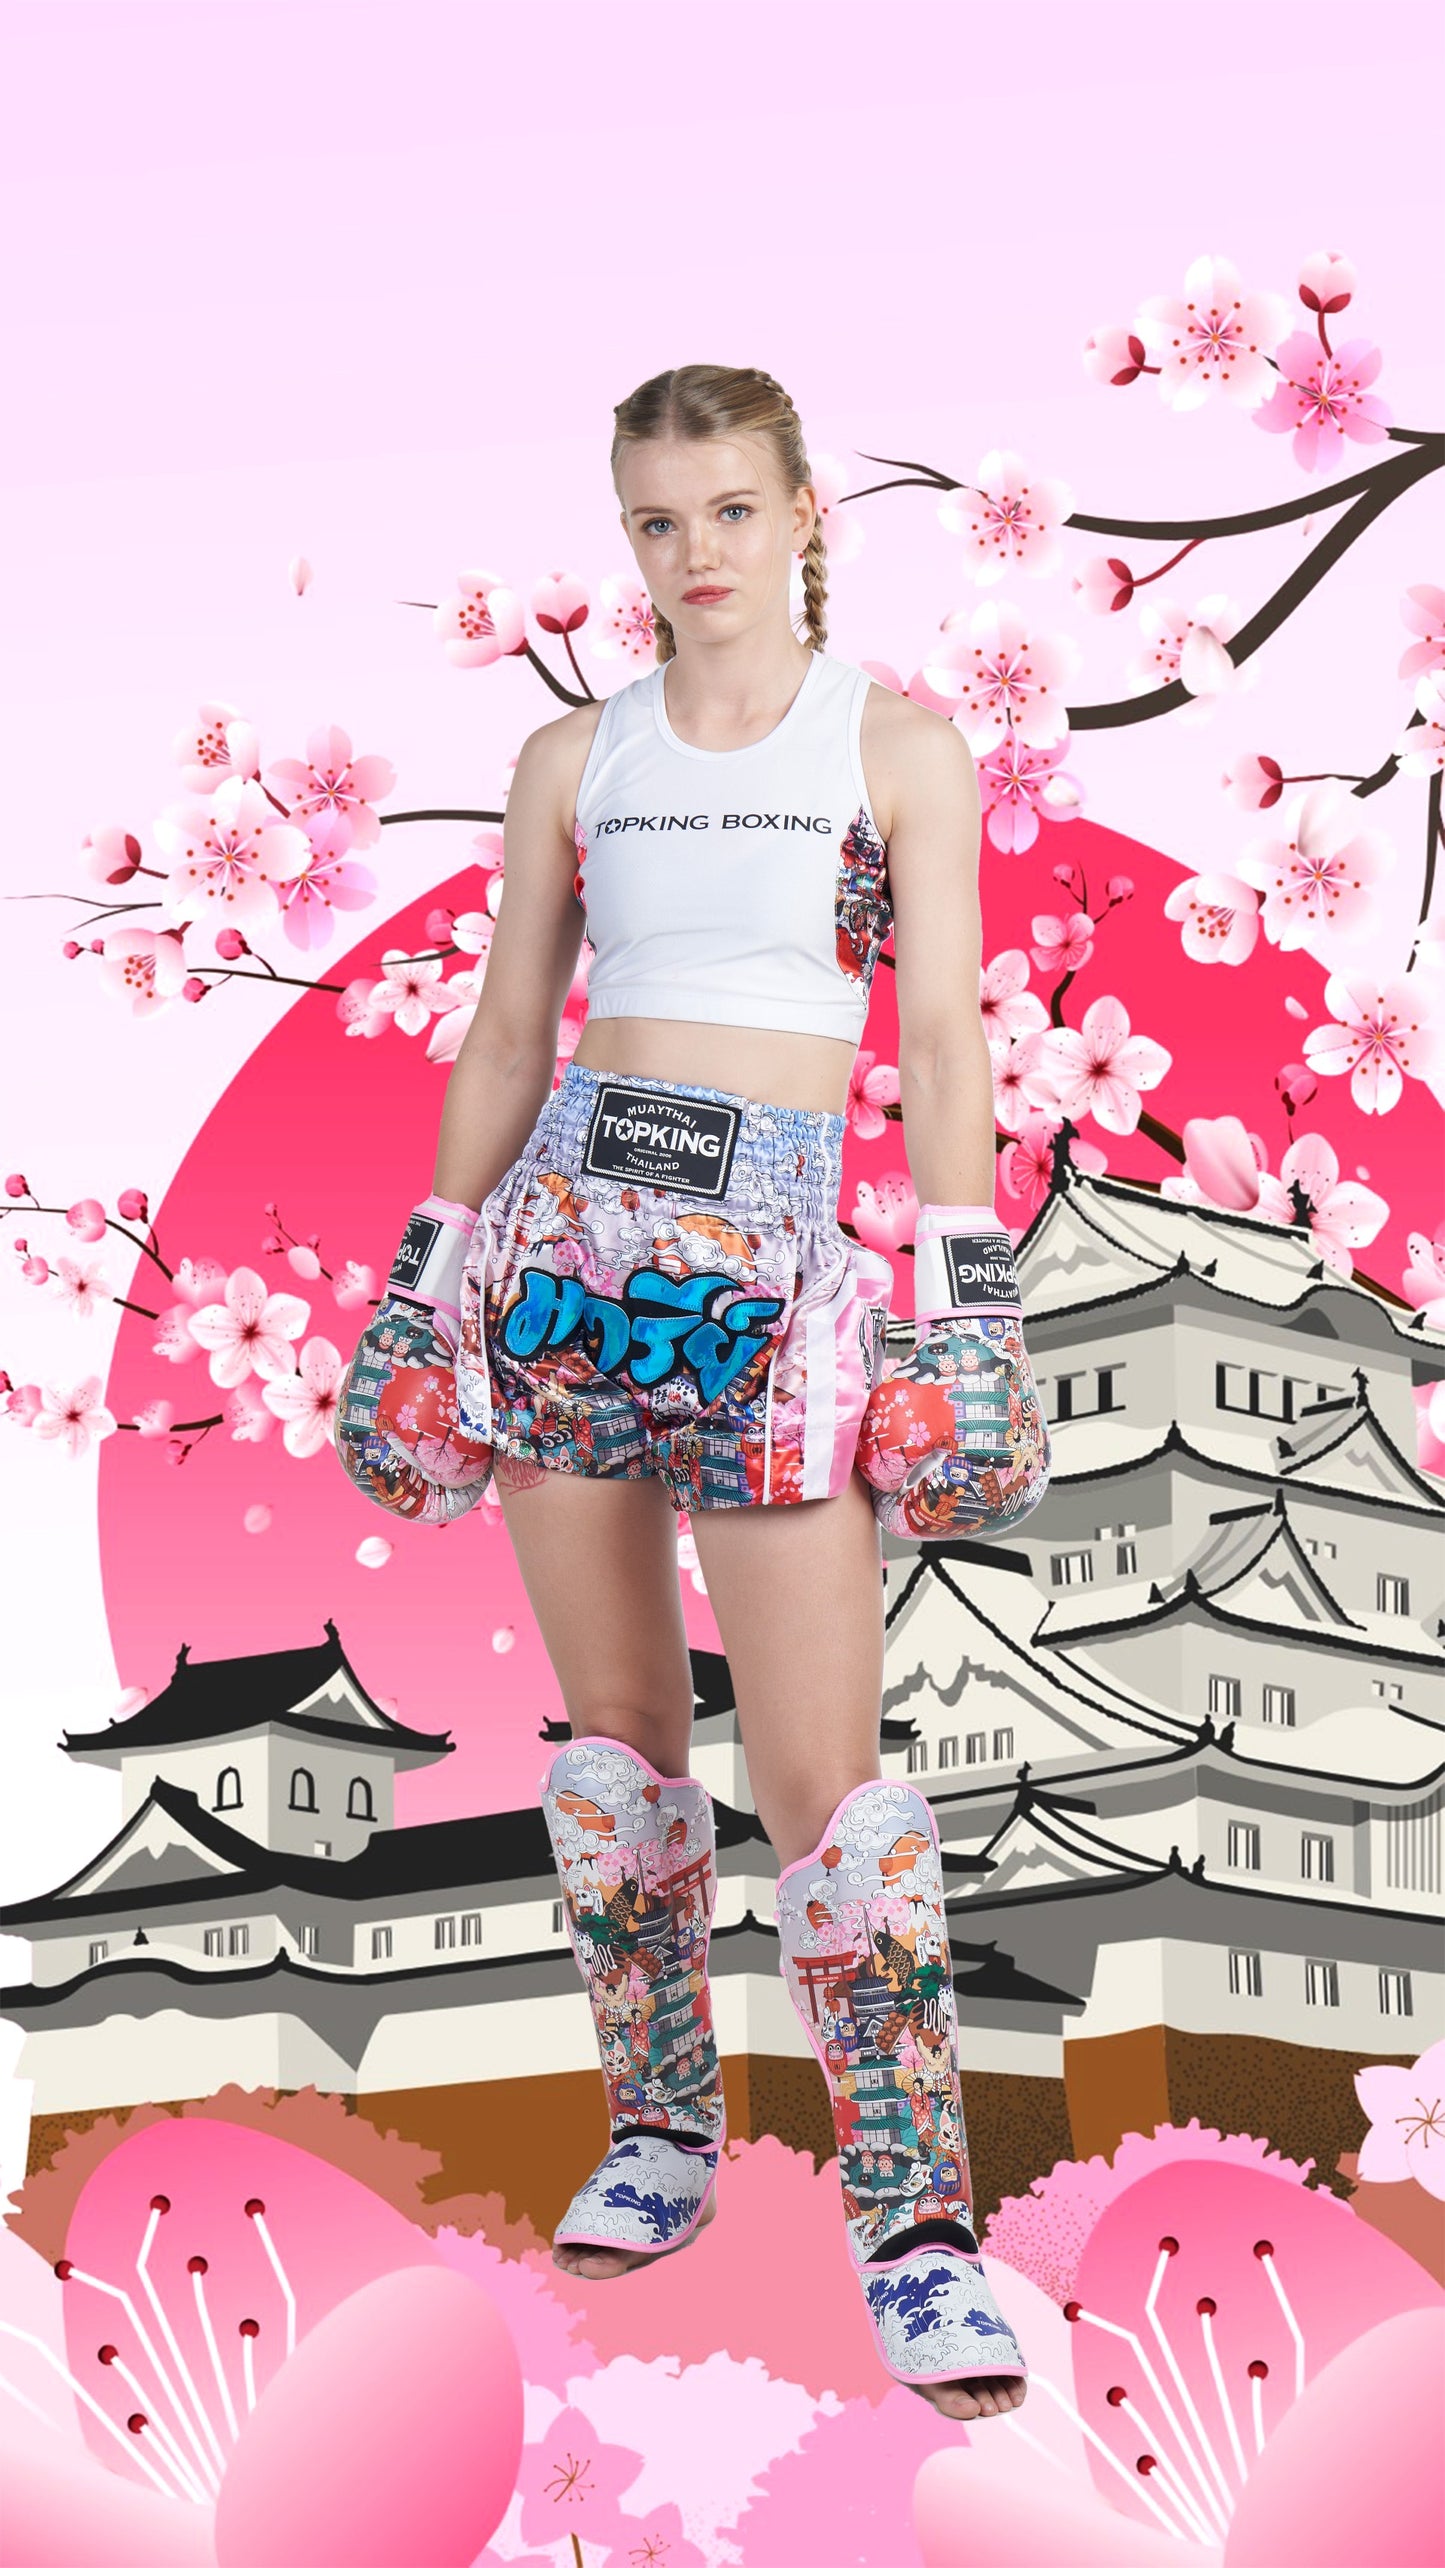 Marie Ruumet in an Muay Thai outfit: Japanese culture Shin guards, Boxing gloves, Muay Thai shorts.